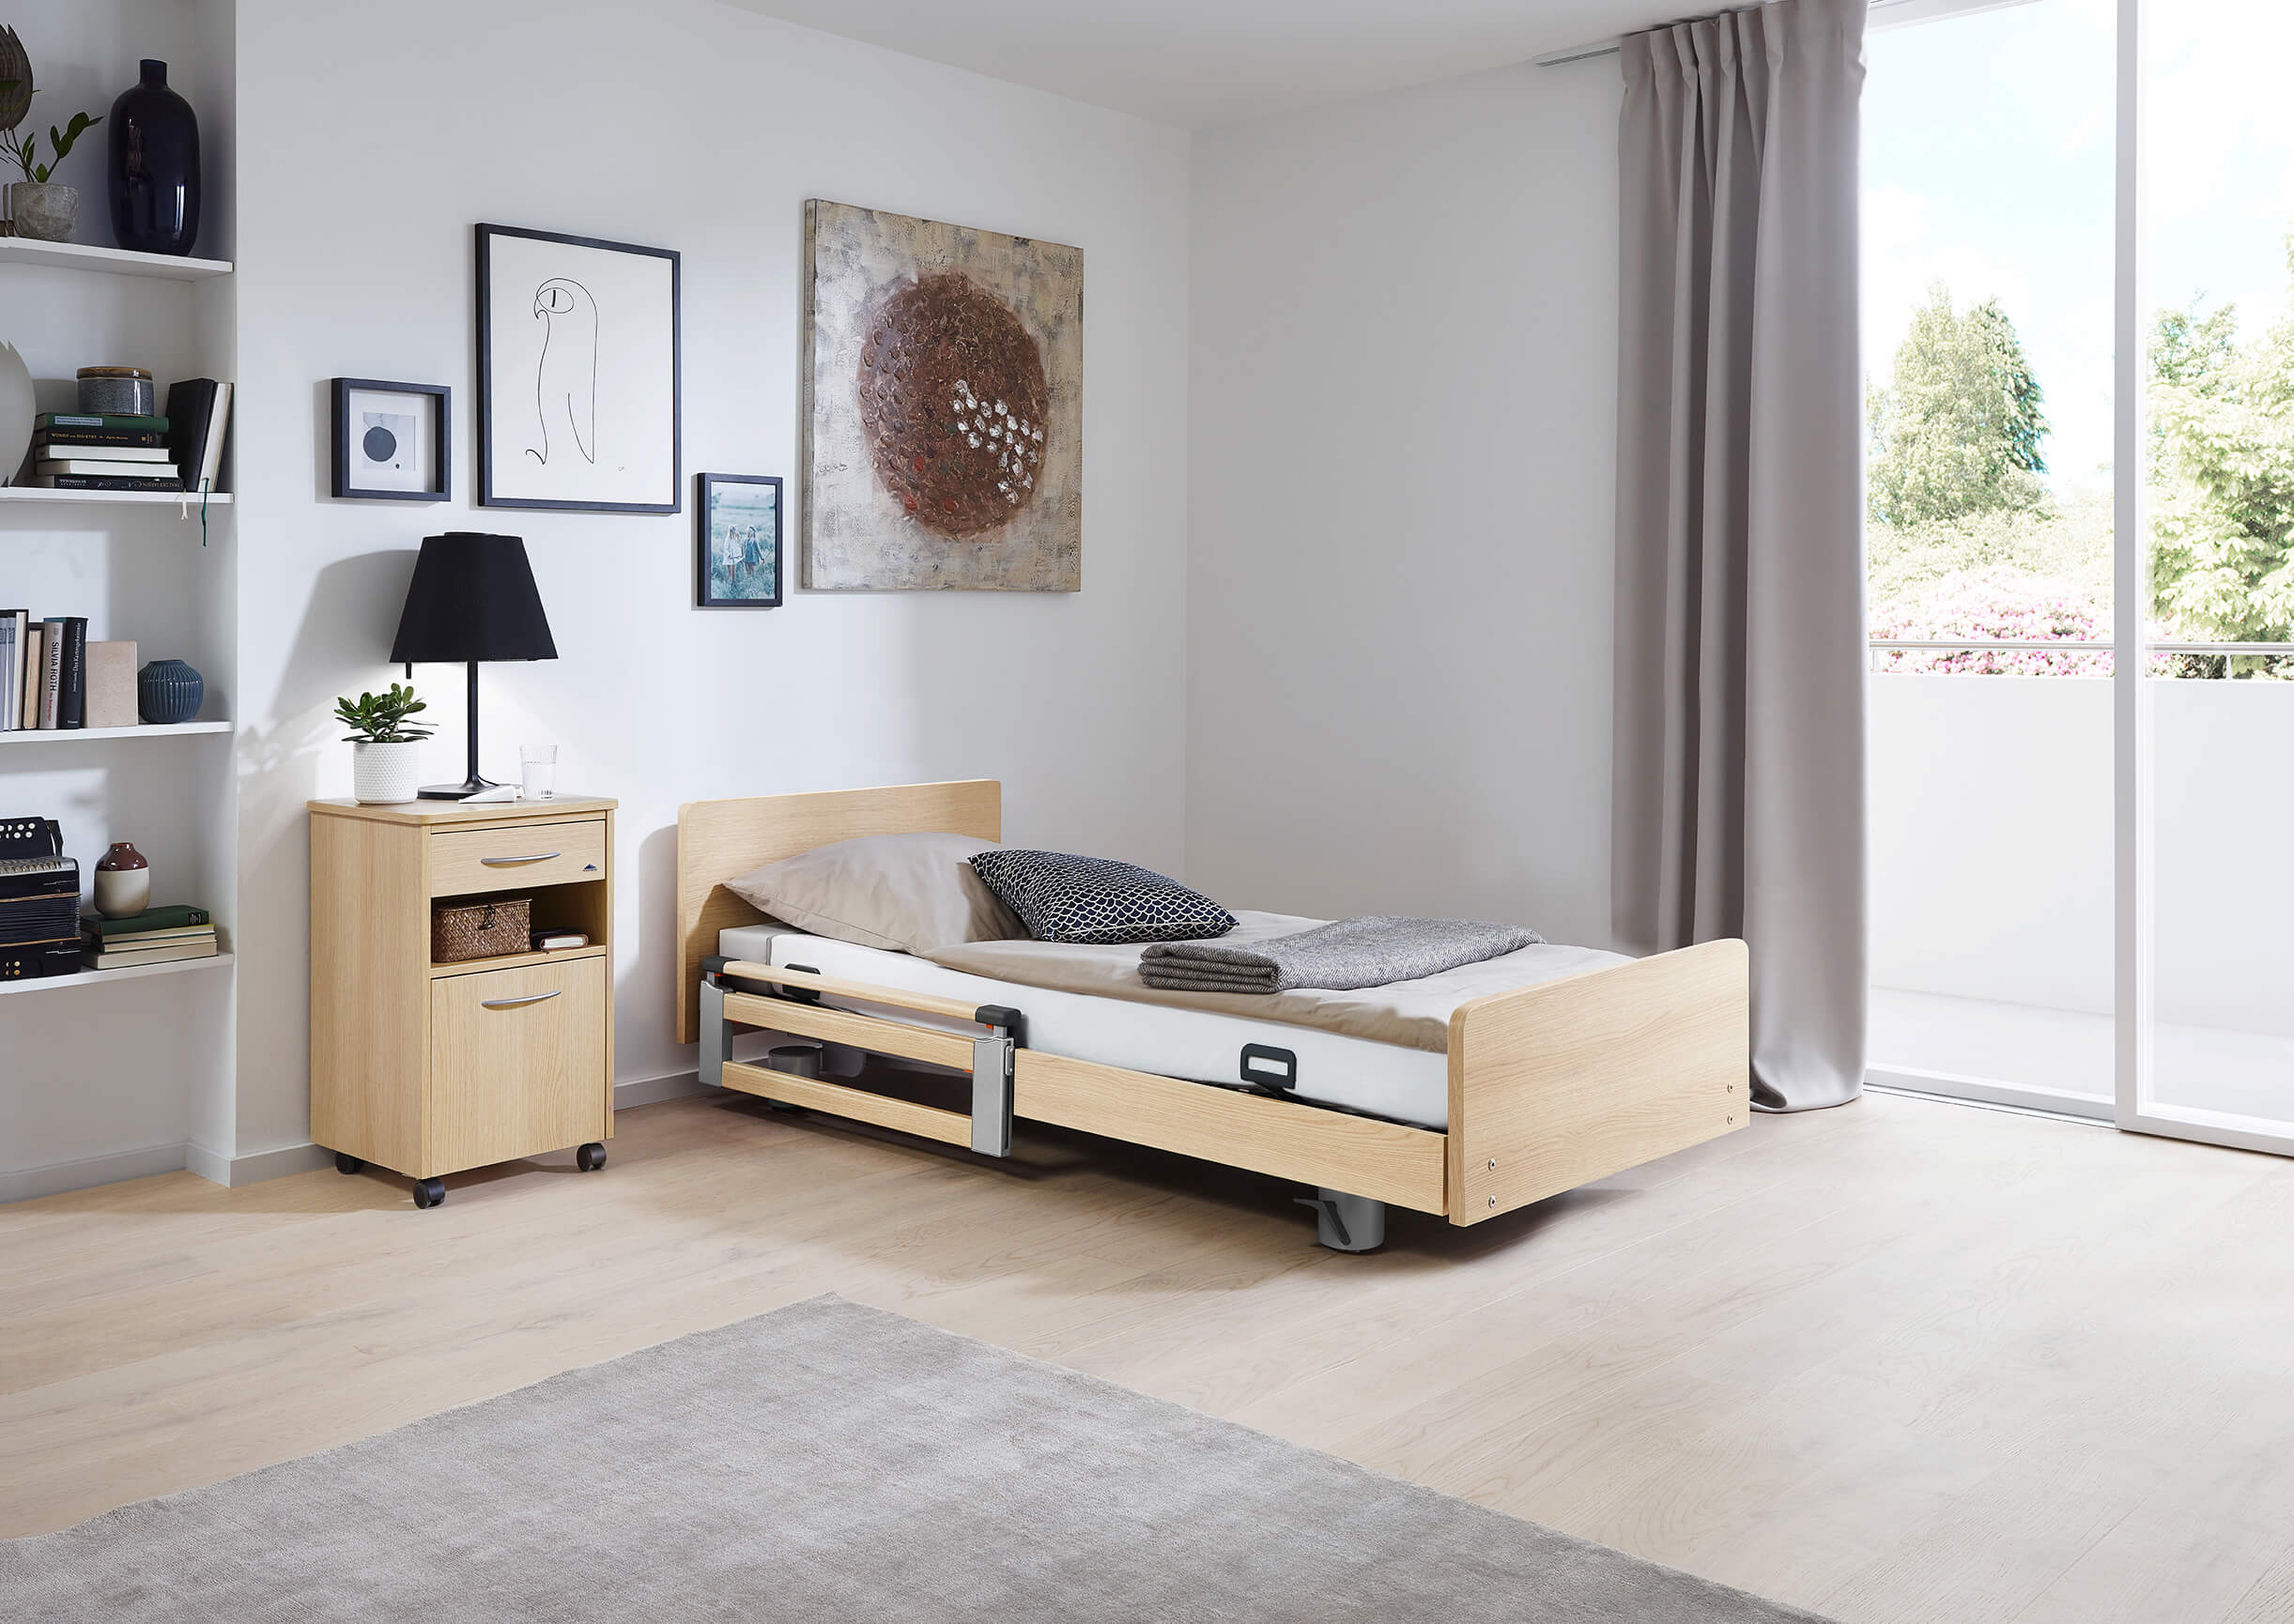 Libra - The low-height bed for modern care